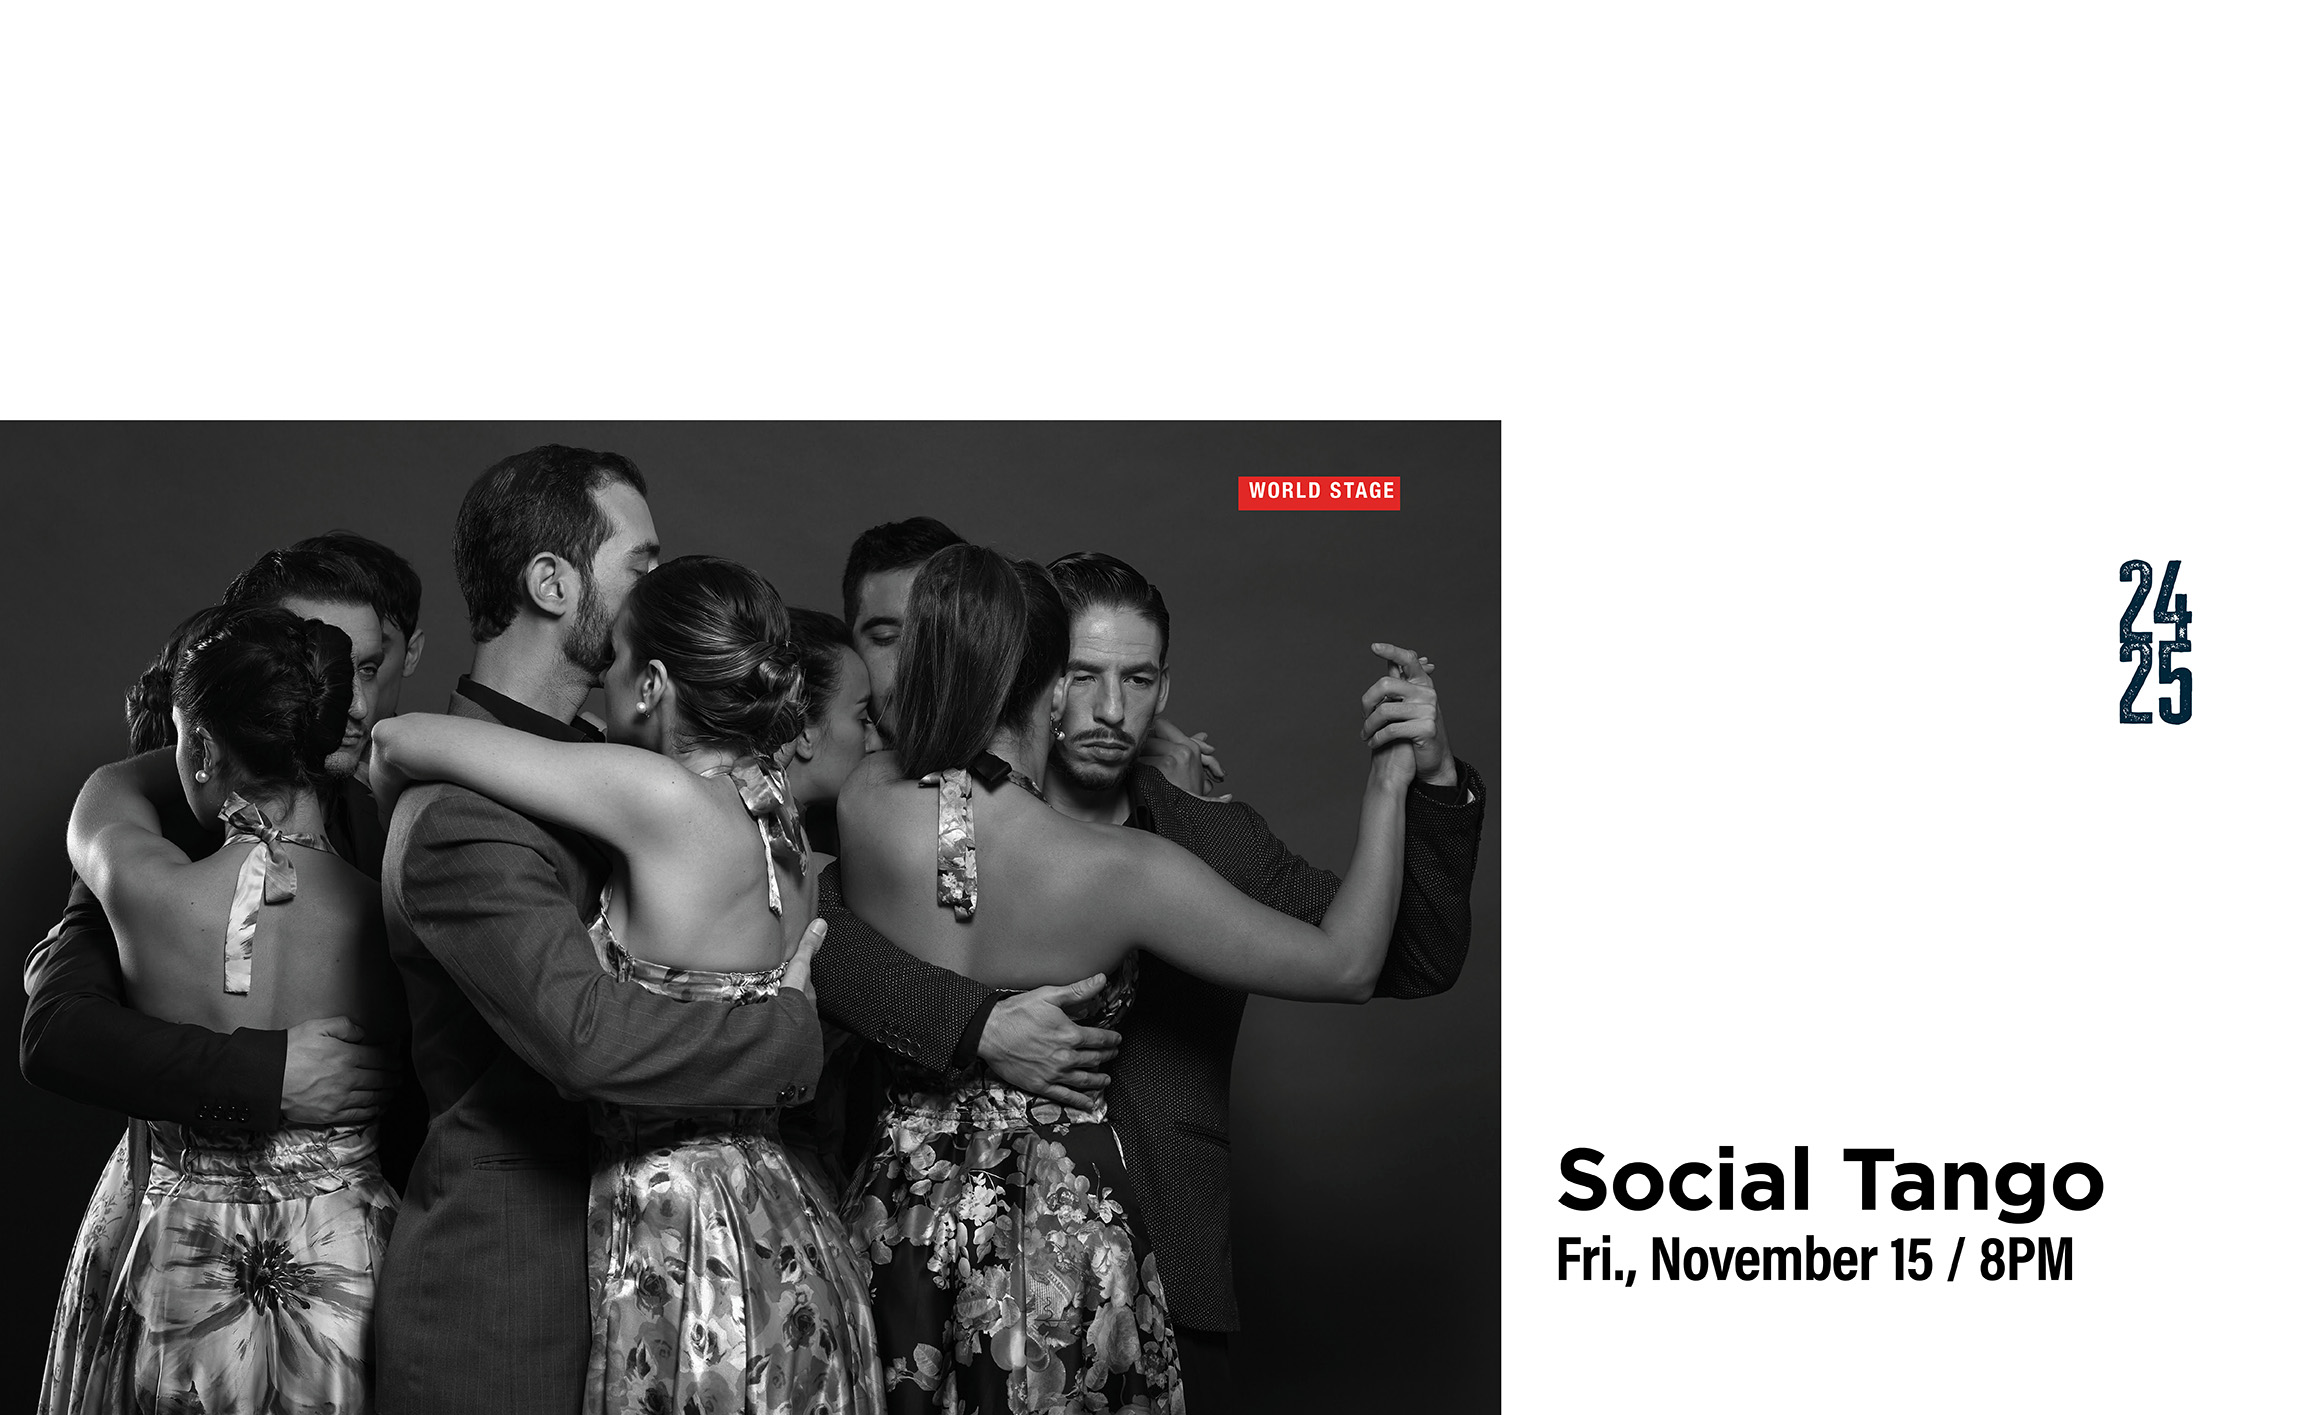 A black-and-white photo shows four couples, each engaged in a close embrace as if dancing. The men are dressed in formal attire, while the women wear patterned dresses.   Text includes event details:  "Social Tango, Fri., November 15 / 8PM."